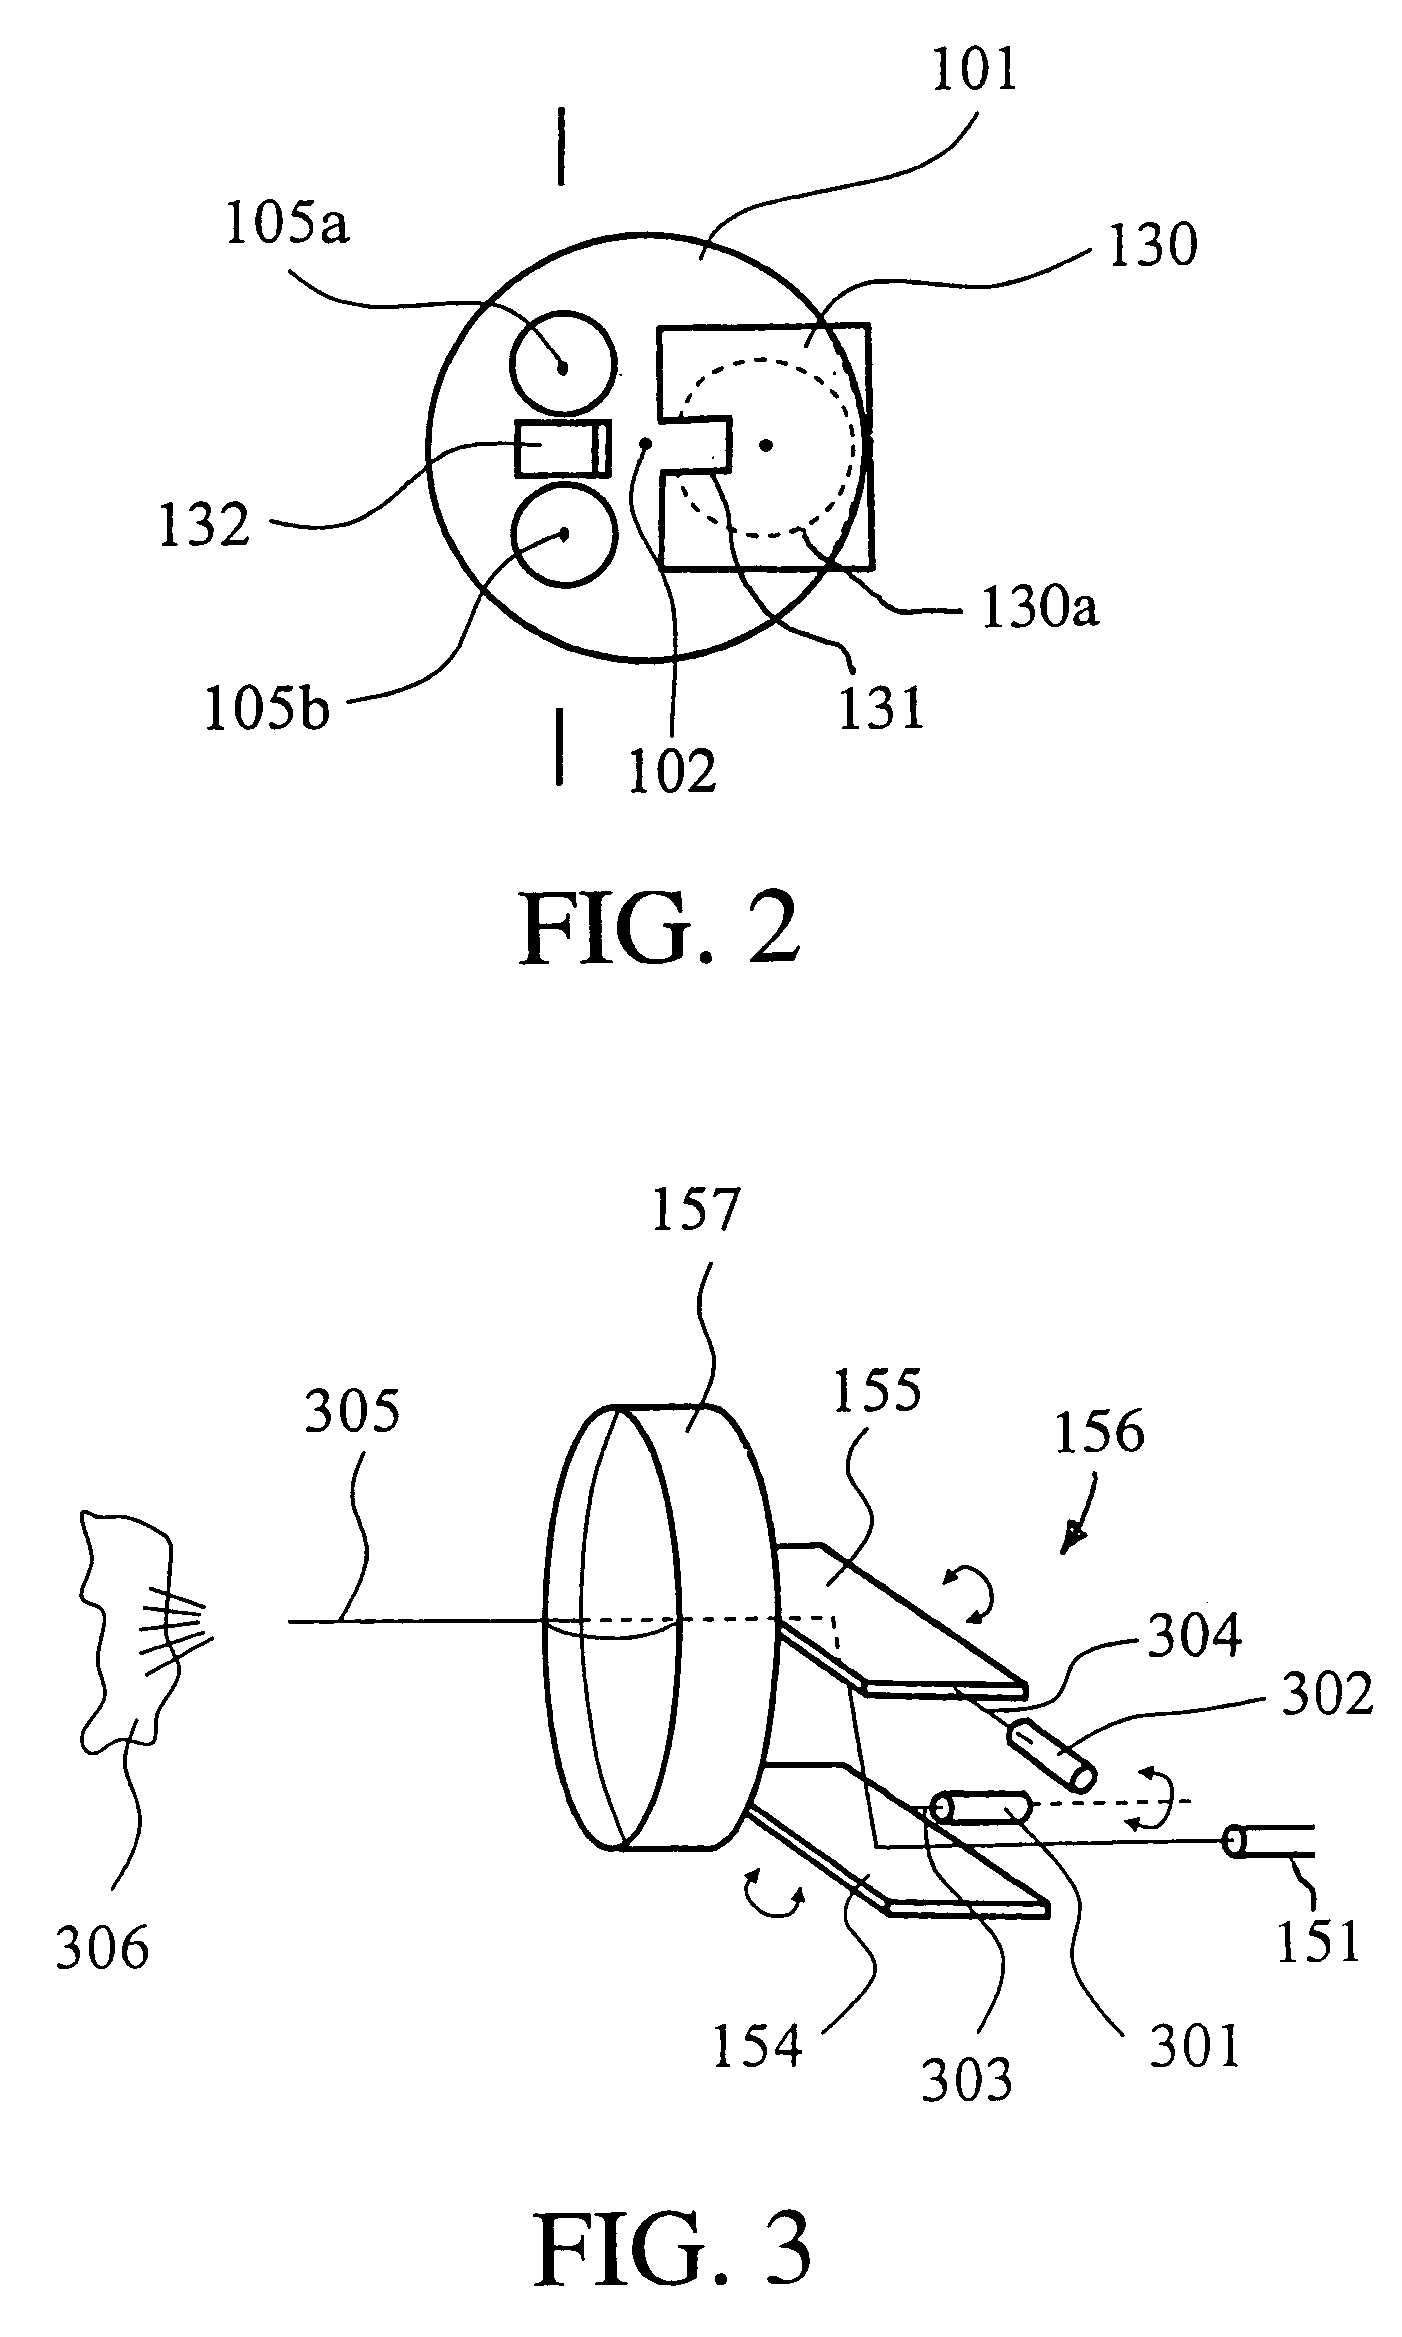 Surgical microscope having an OCT-system and a surgical microscope illuminating module having an OCT-system